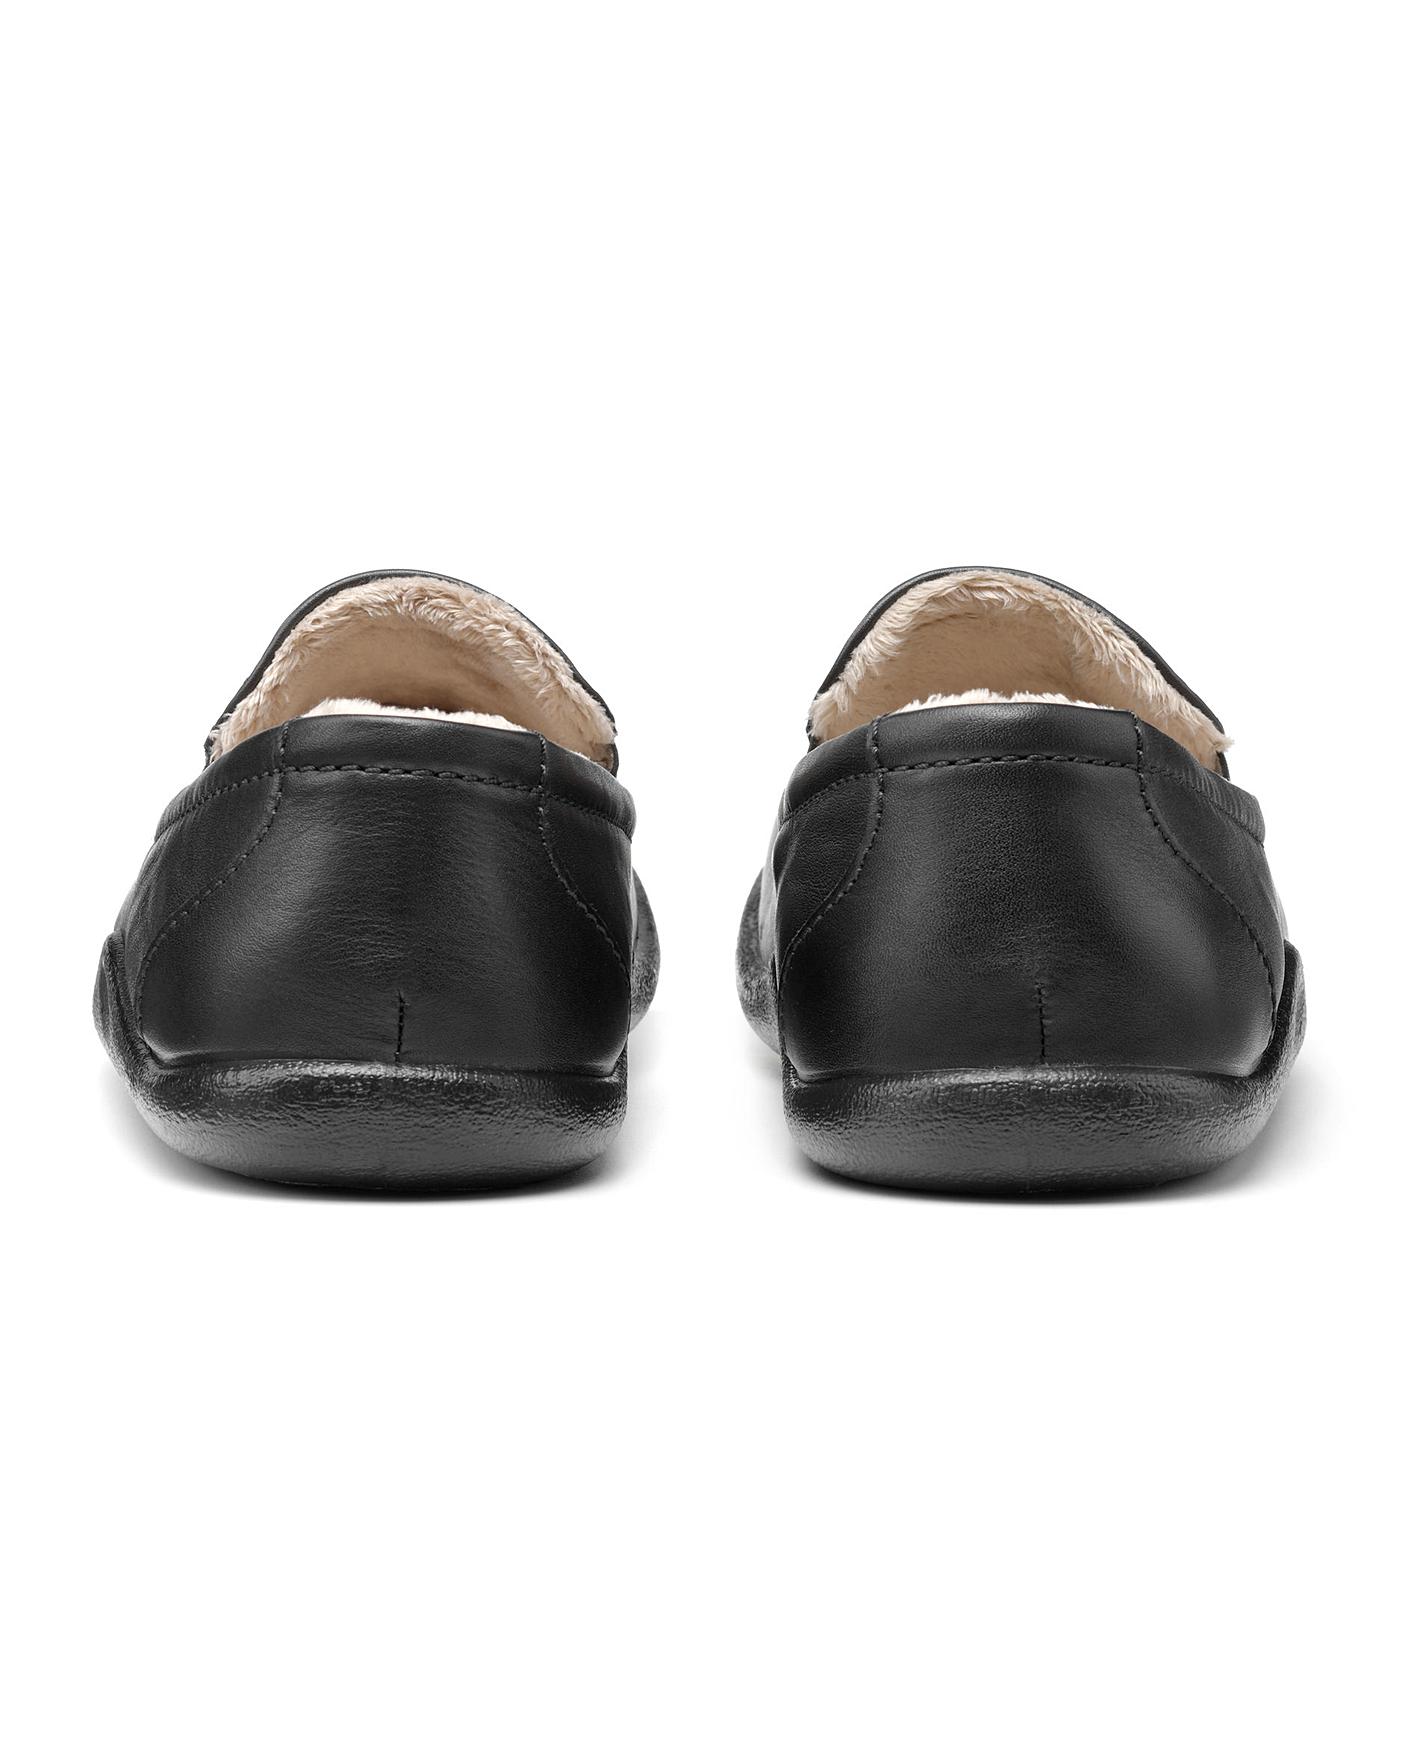 hotter mens relax slippers